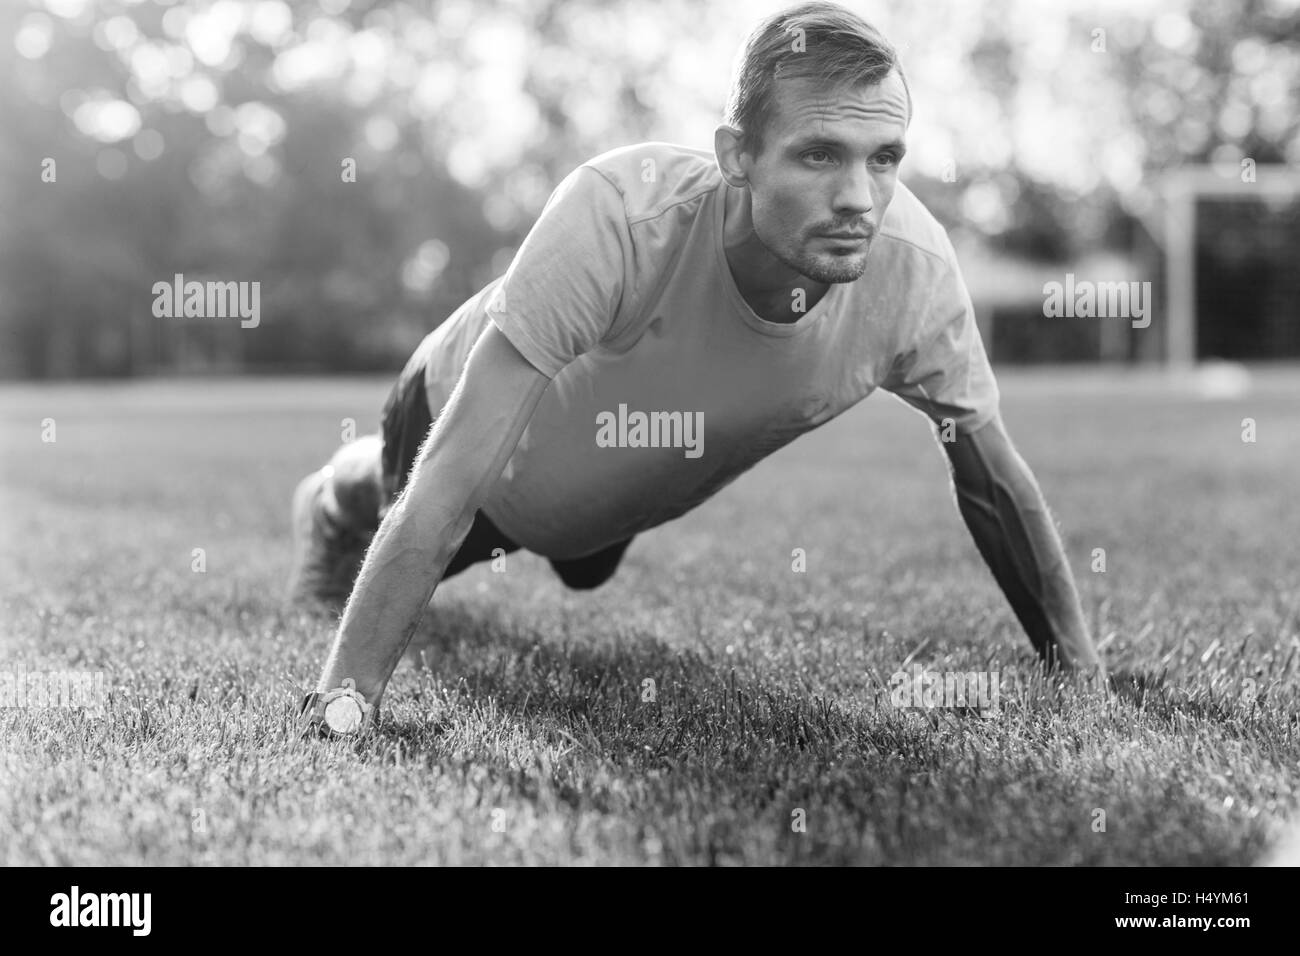 Black and white portrait of man training outdoors Stock Photo